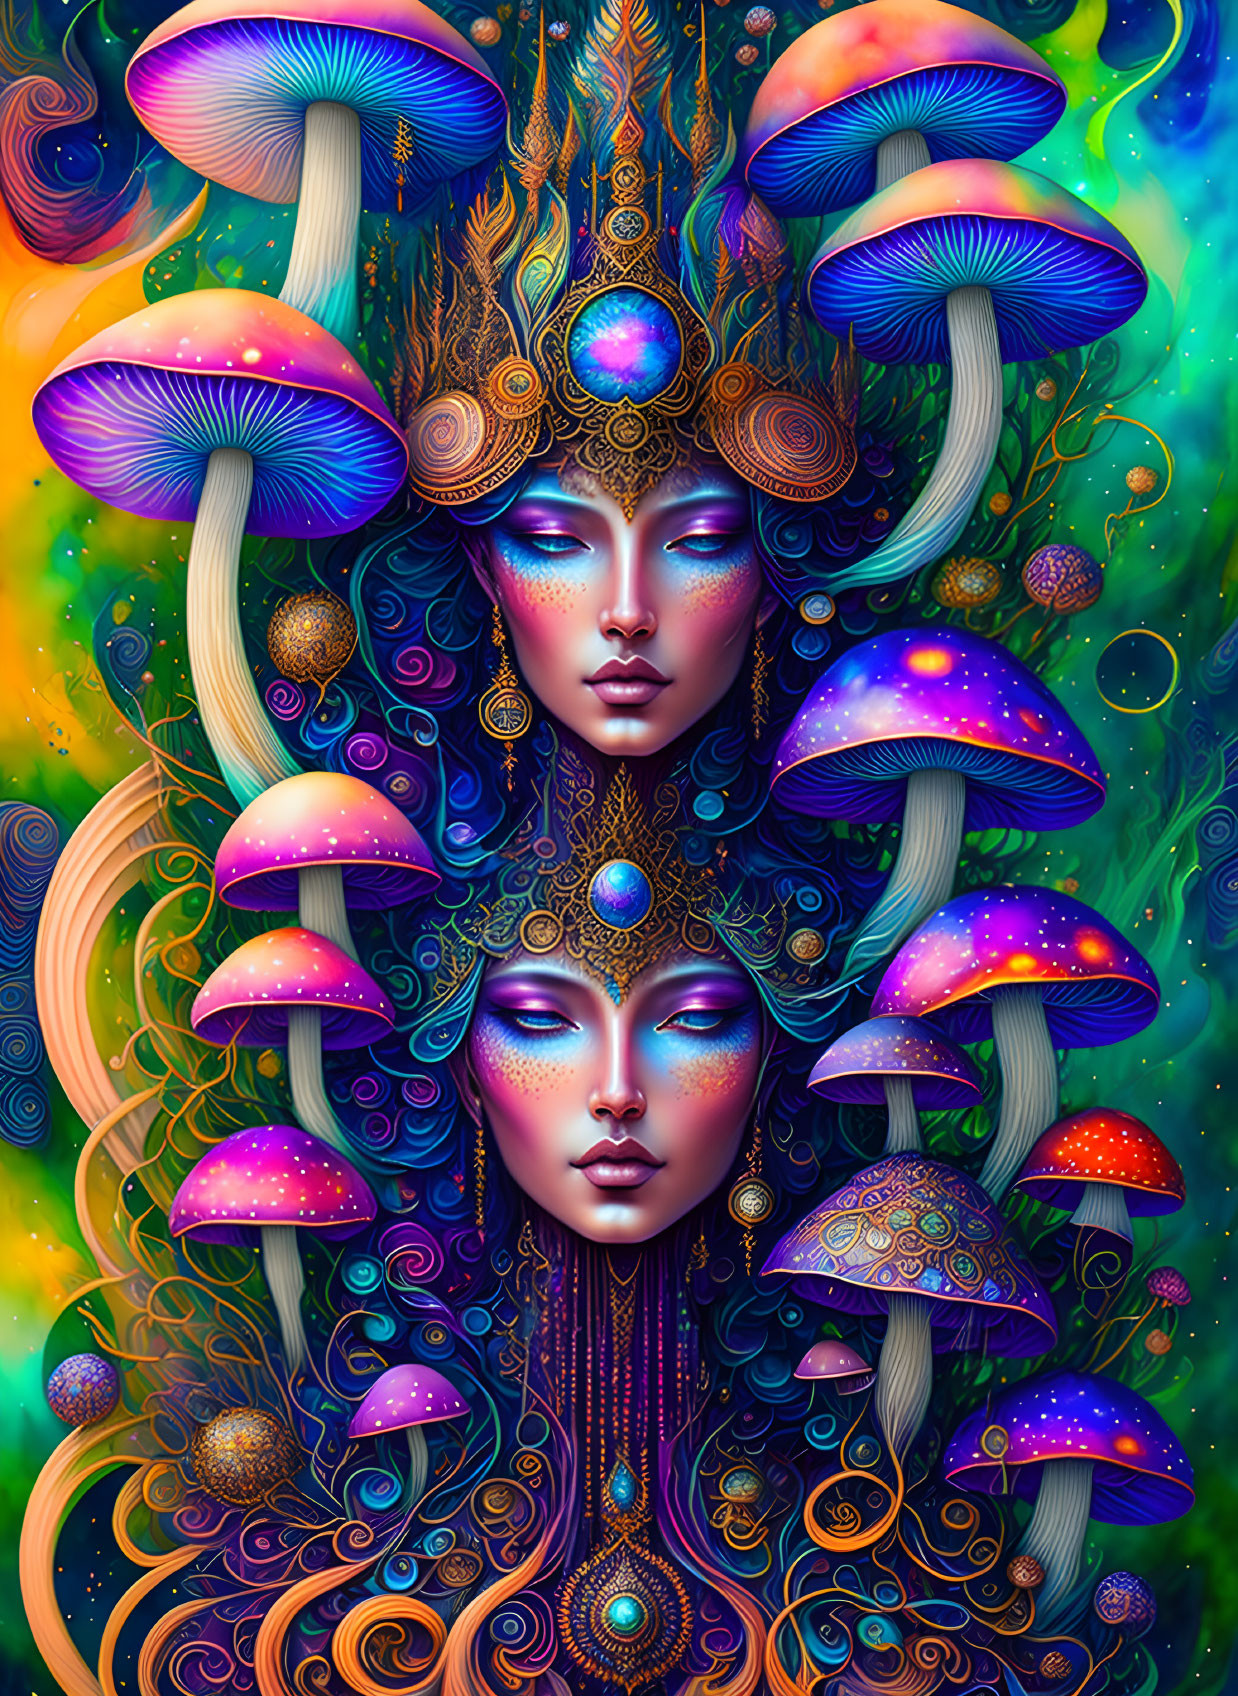 Colorful Artwork: Ethereal Faces with Ornate Headdresses and Psychedelic Mushrooms